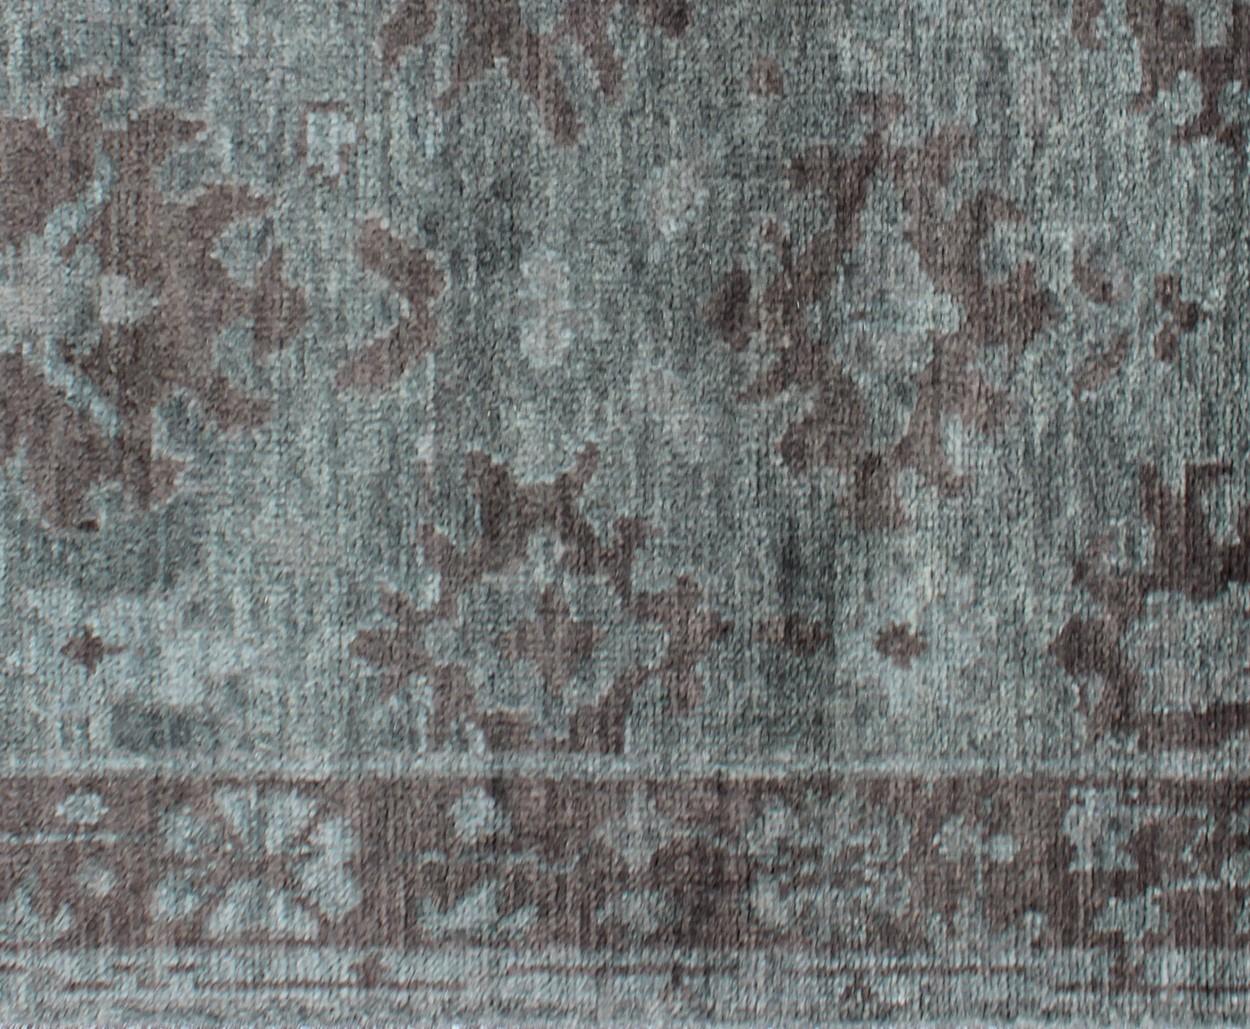 Keivan Woven Arts, OB-103432954, Modern Oushak Rug- 
This hand-knotted modern Oushak rug features an all-over geometric design rendered in shades of grey-green and brown tones.
Measures: 4'0 x 6'0.